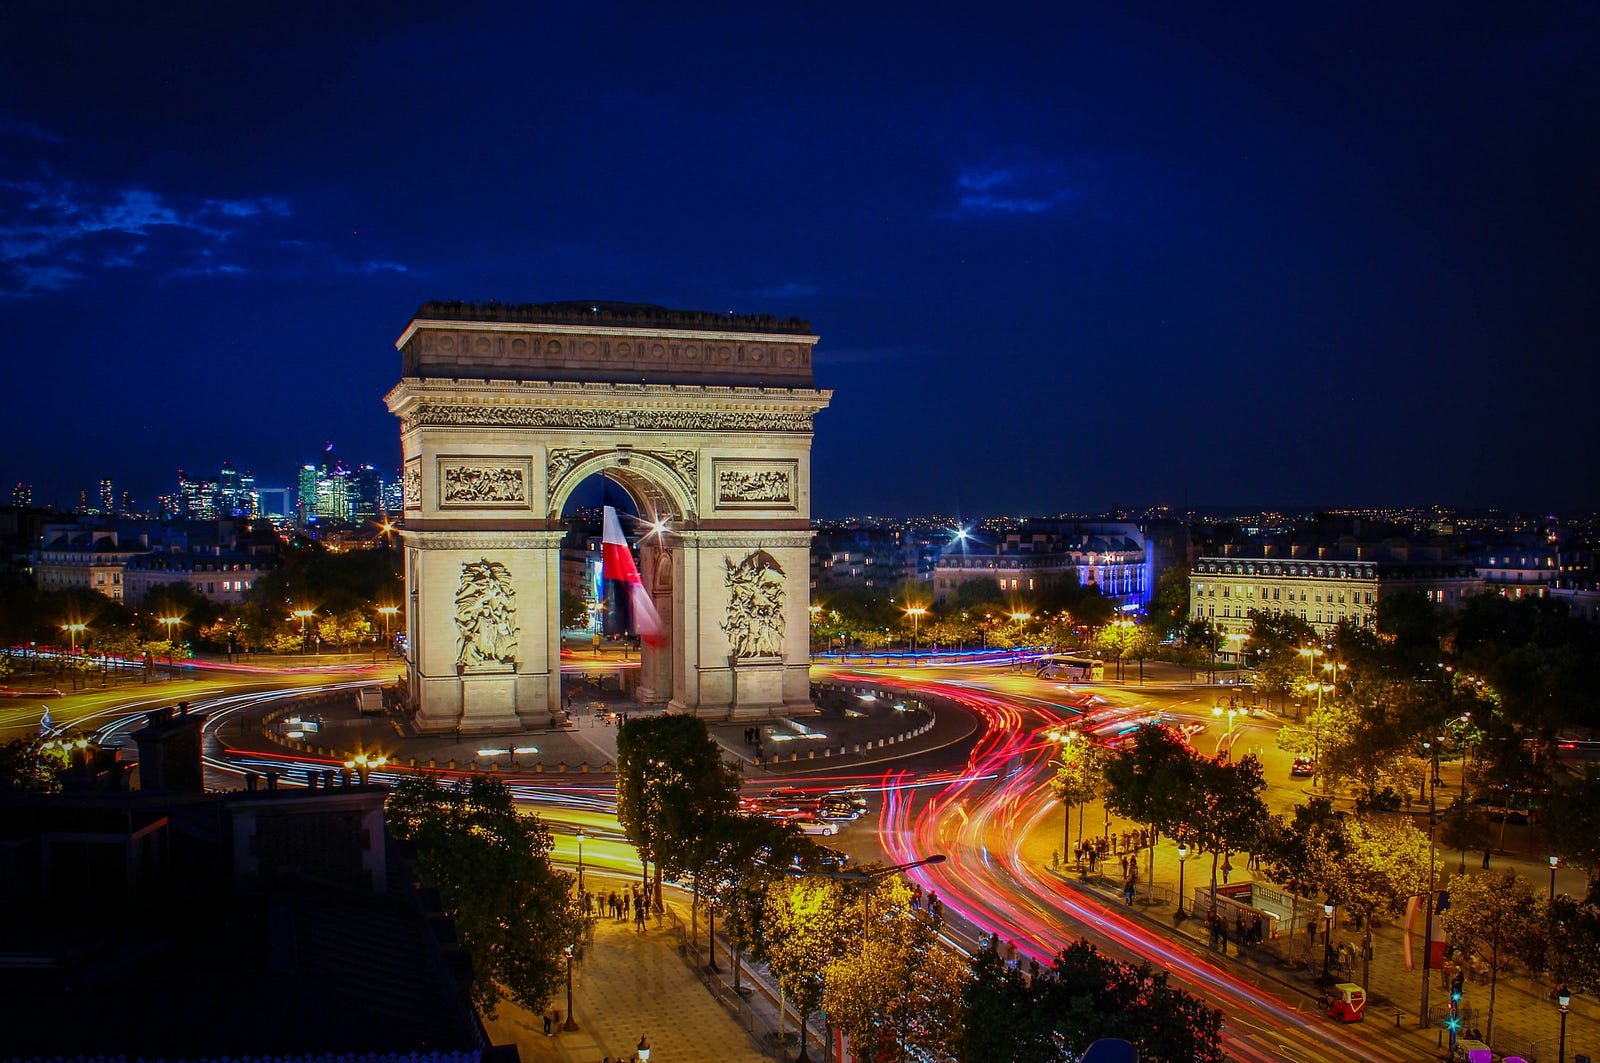 A night view of the Arch de Triomph in Paris, France.